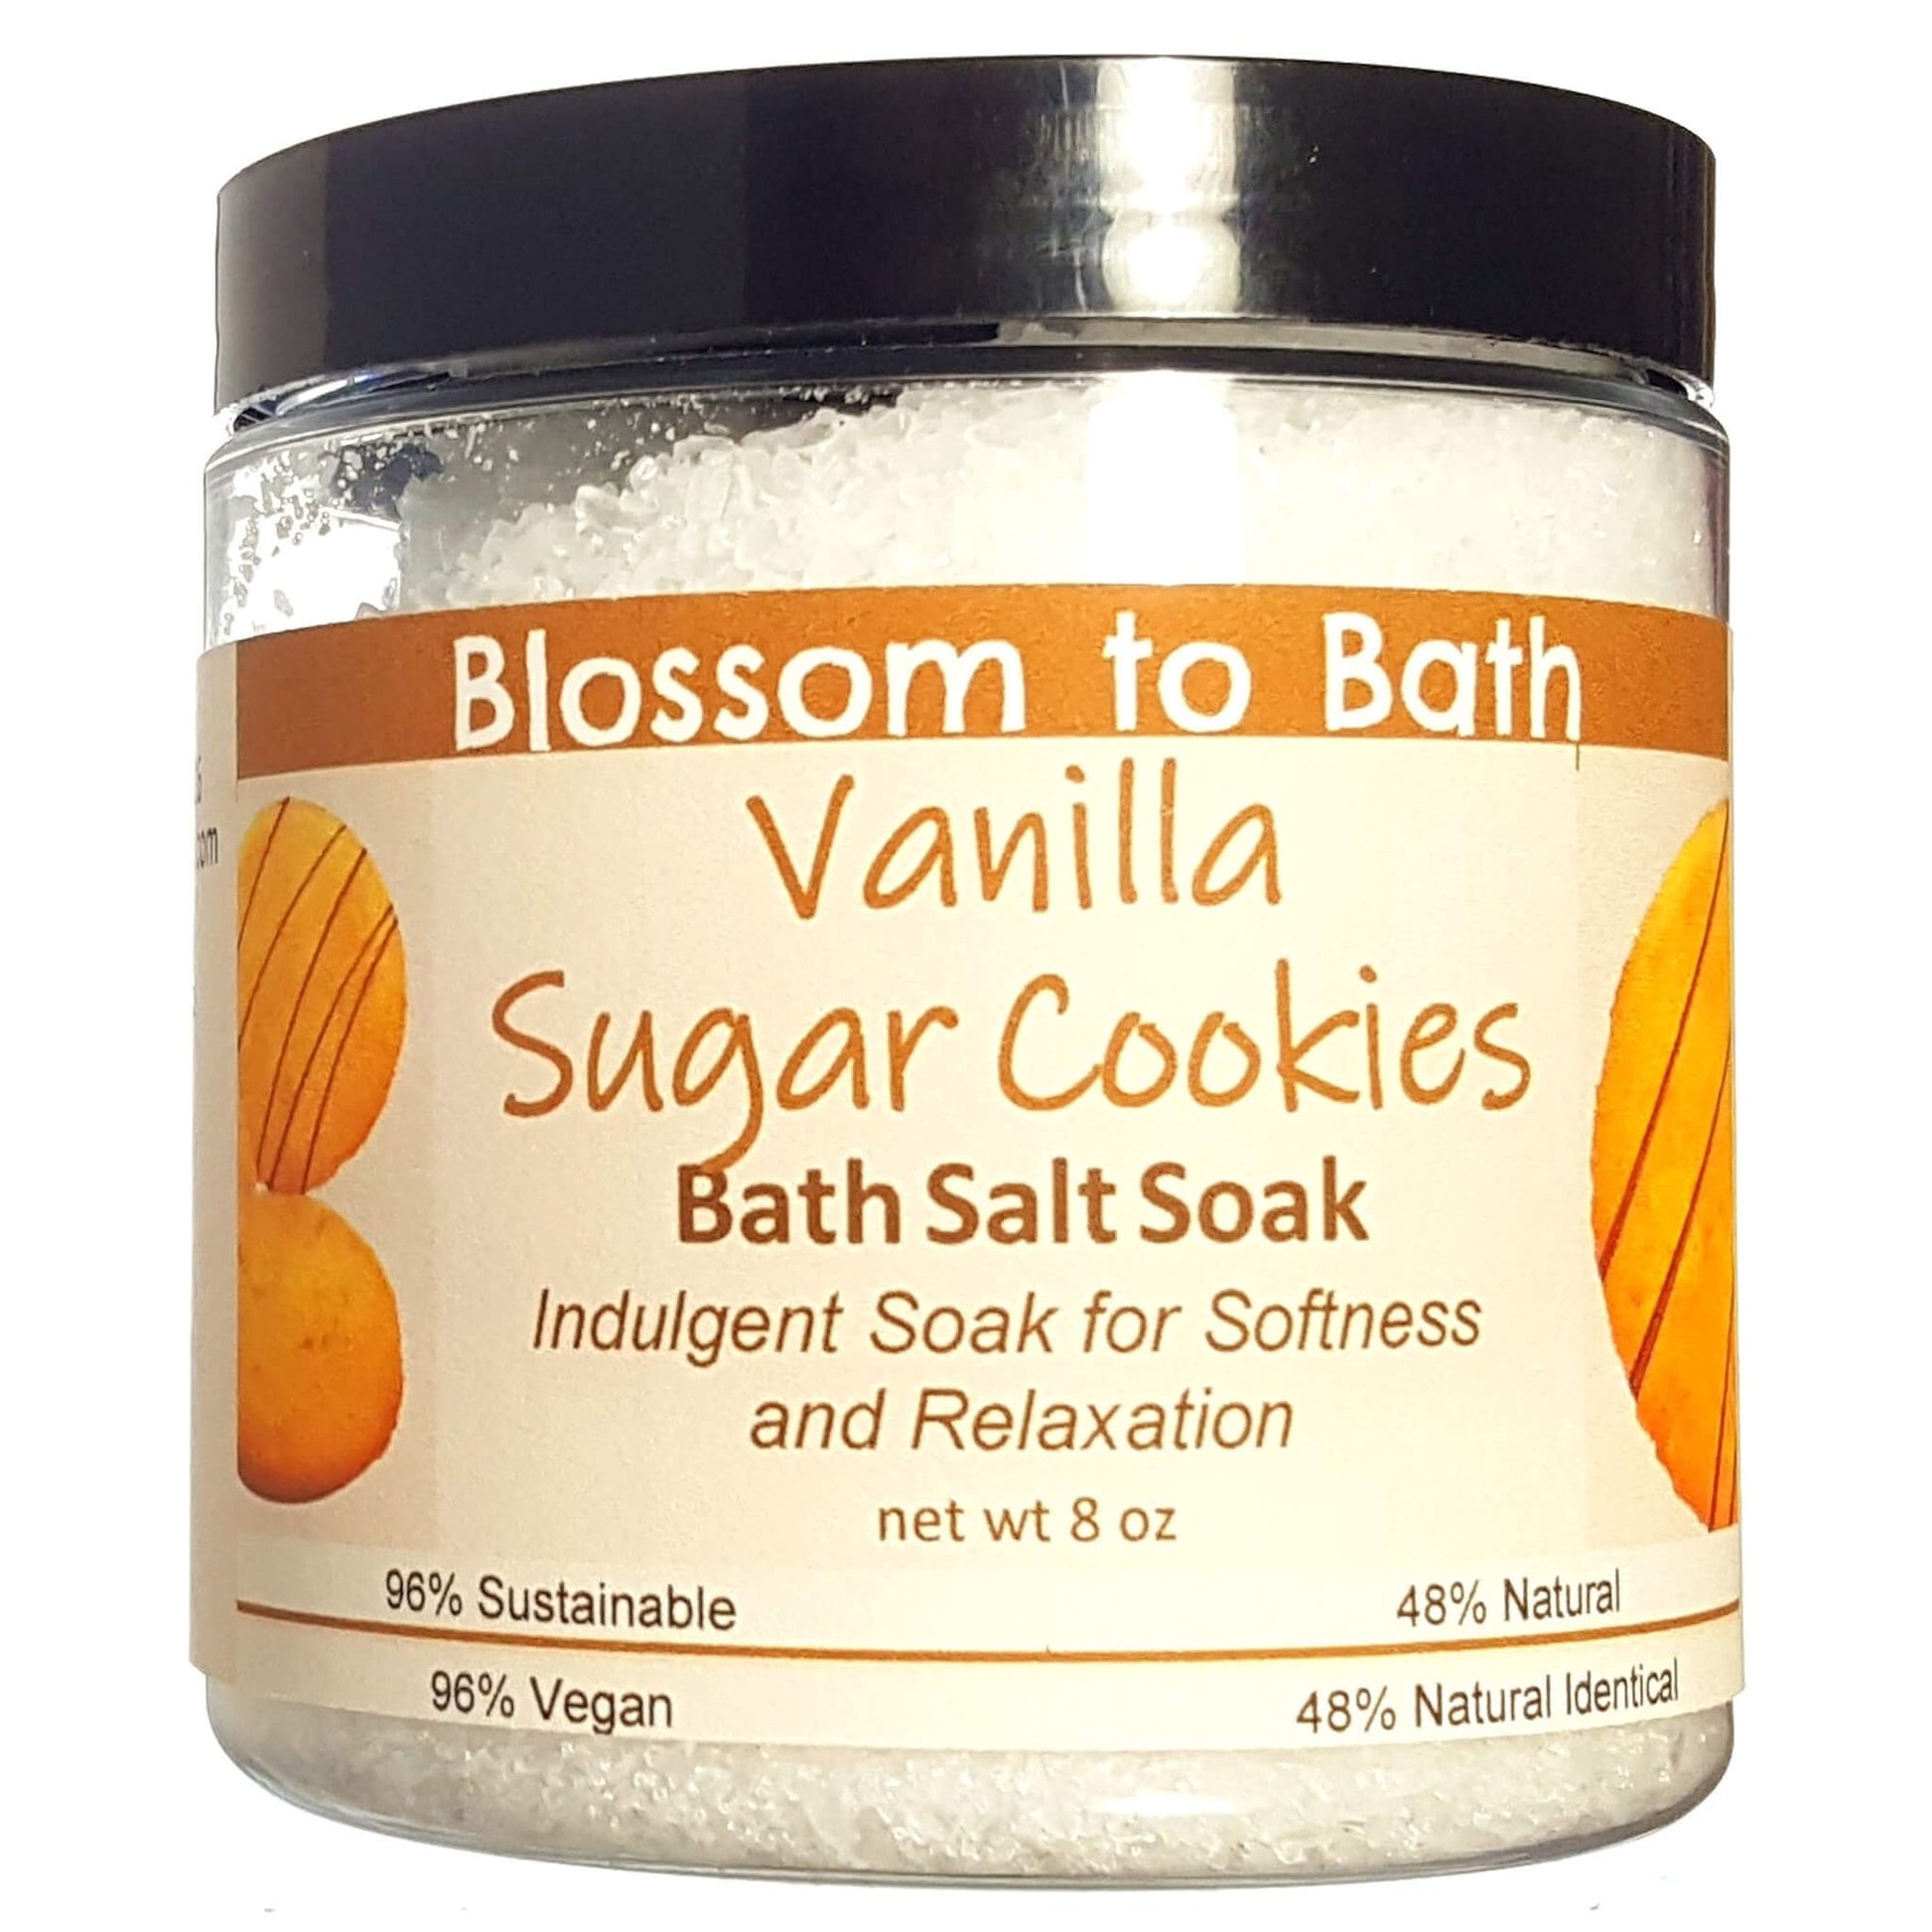 Buy Blossom to Bath Vanilla Sugar Cookies Bath Salt Soak from Flowersong Soap Studio.  Scented epsom salts for a luxurious soaking experience  Smells like sugar cookies in the oven.